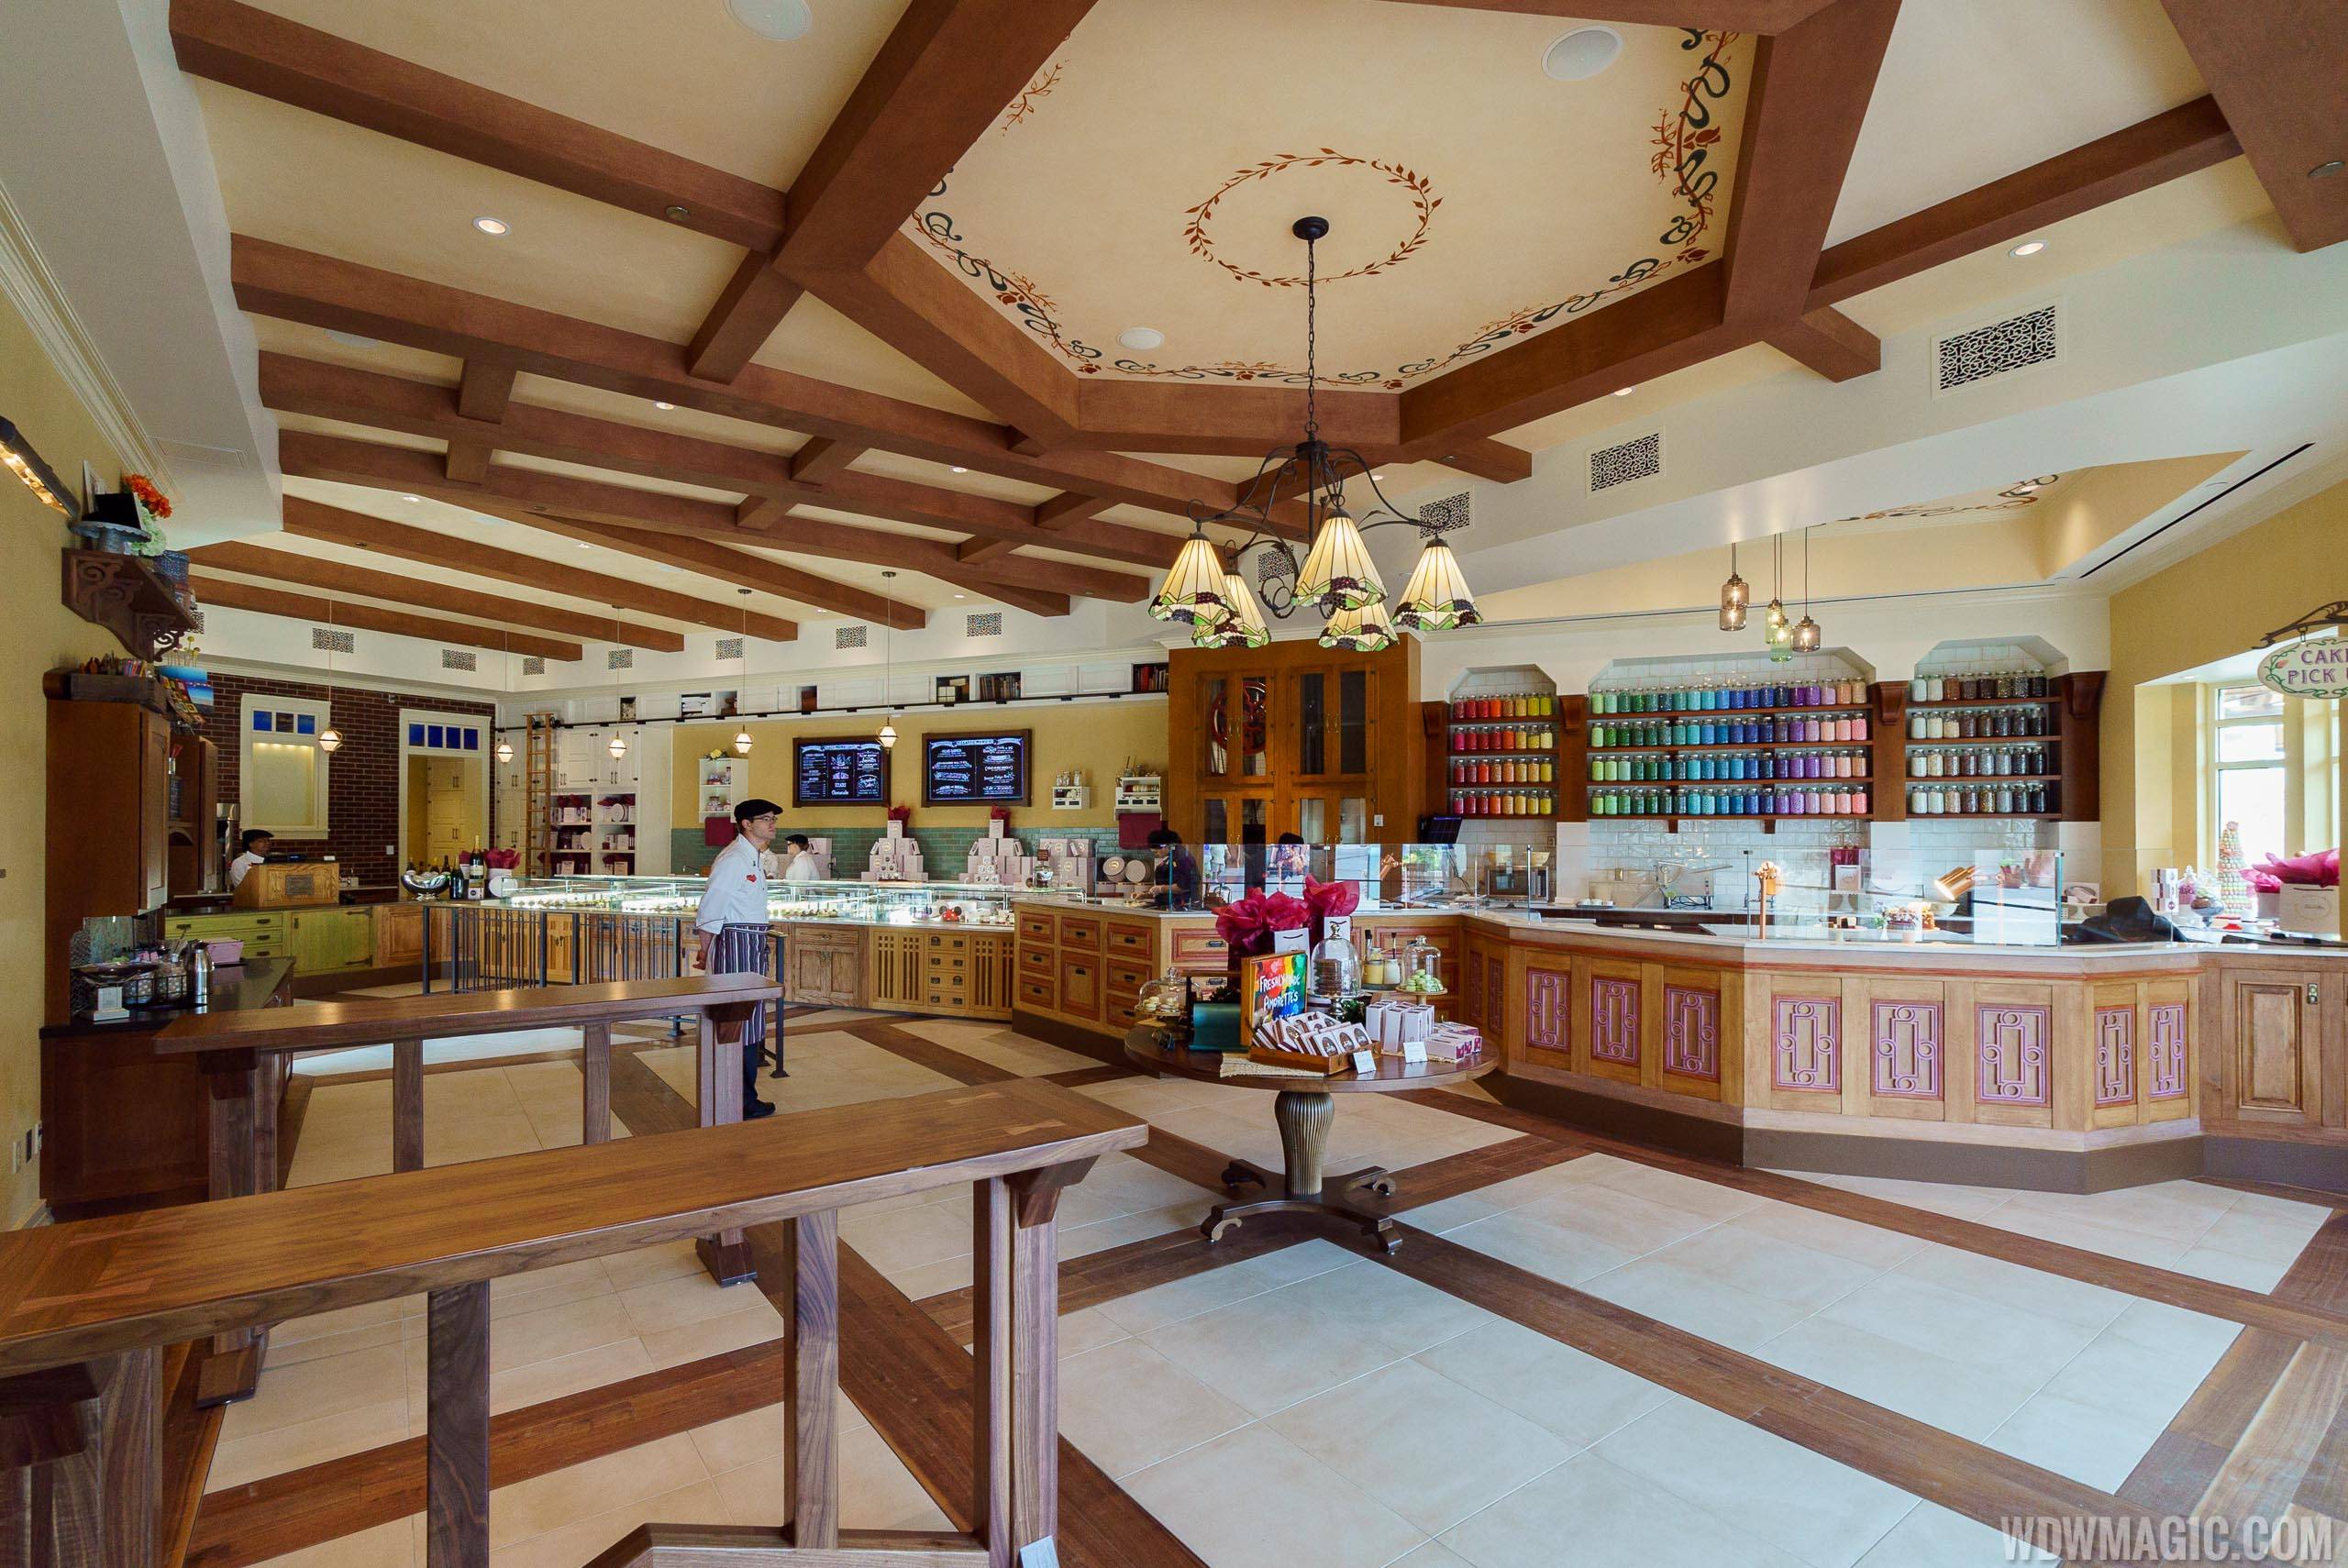 New cake decorating experience at Amorette's Patisserie in Disney Springs